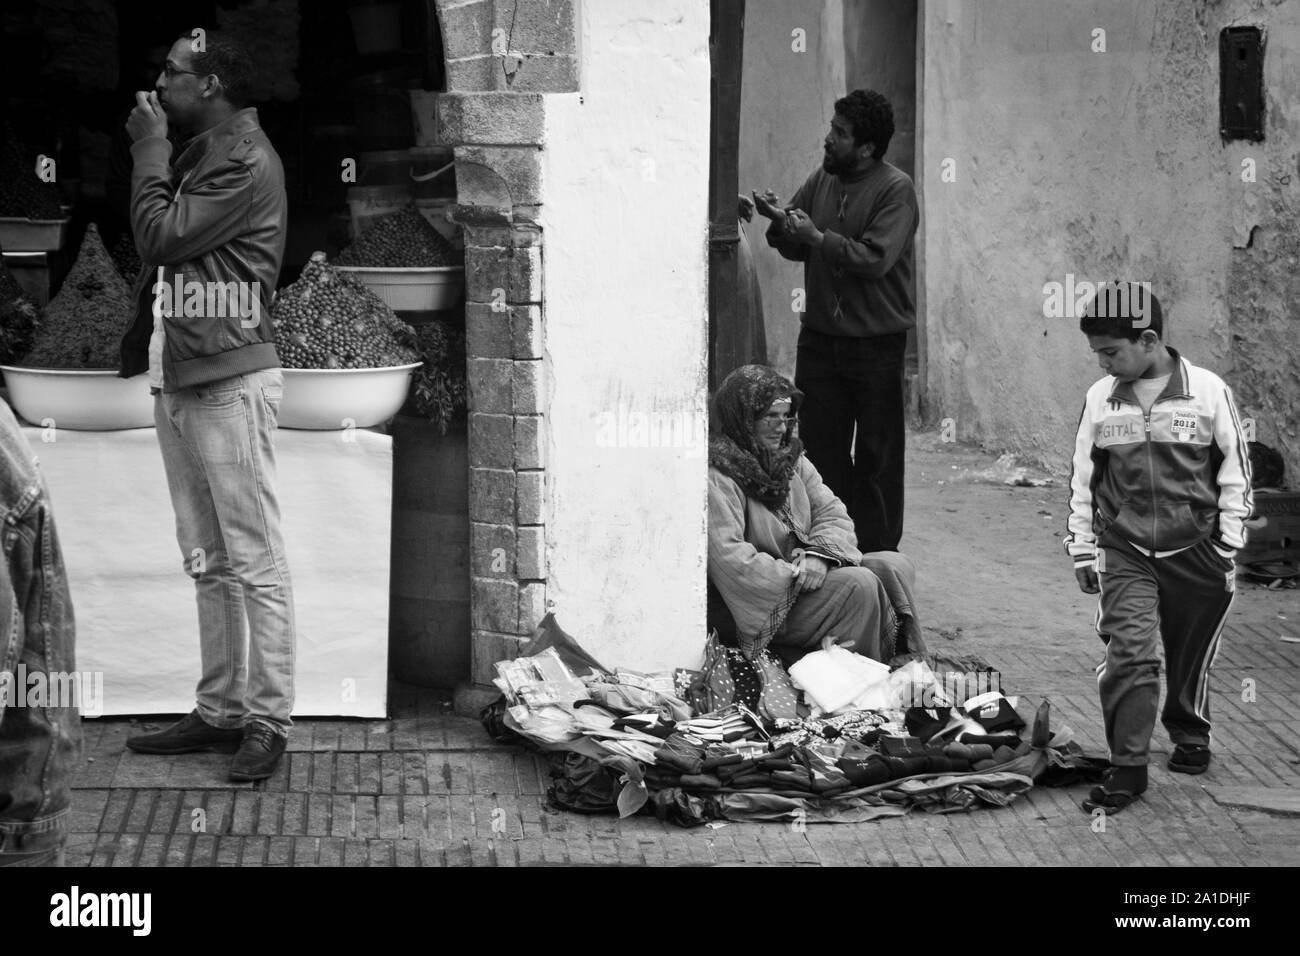 A boy looks at a woman's wares in Essaouira, Morocco, Africa Stock Photo